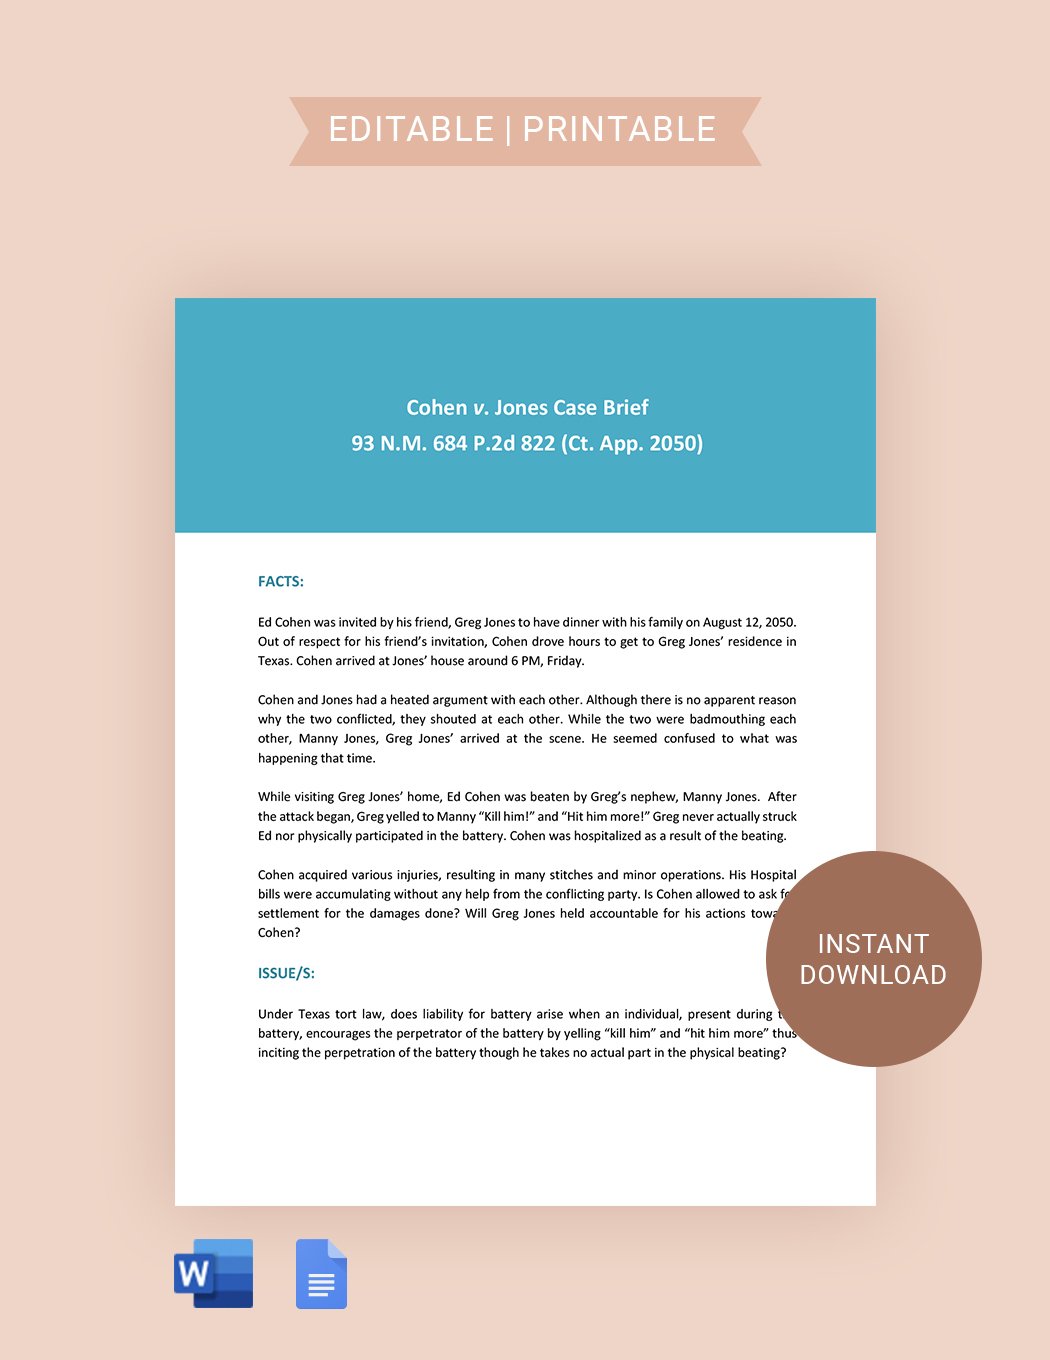 Law Student Case Brief Summary Sheet Template in Word Google Docs